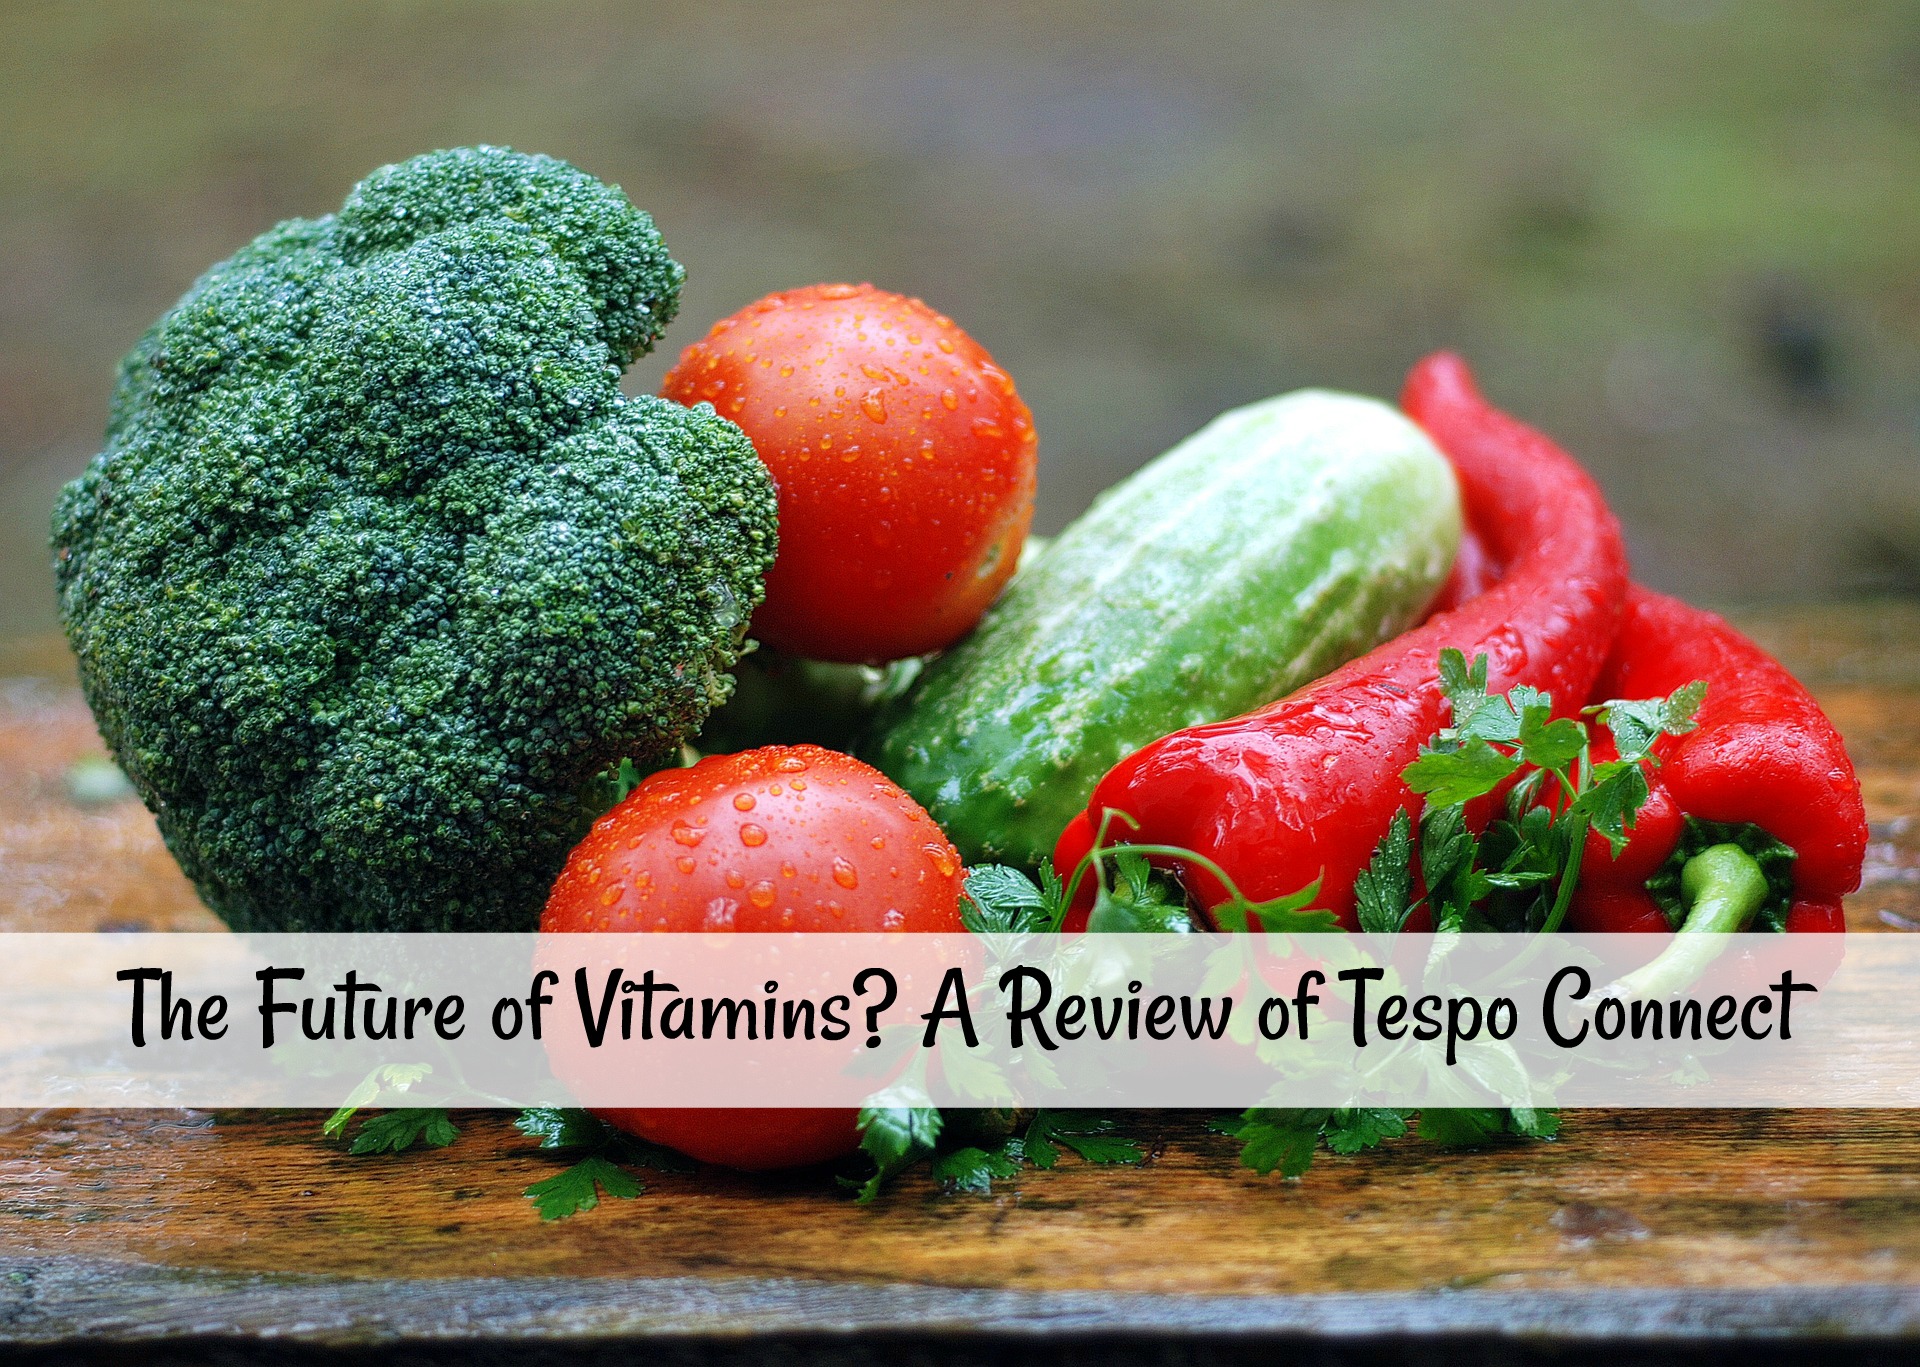 The Future of Vitamins? A Review of Tespo Connect